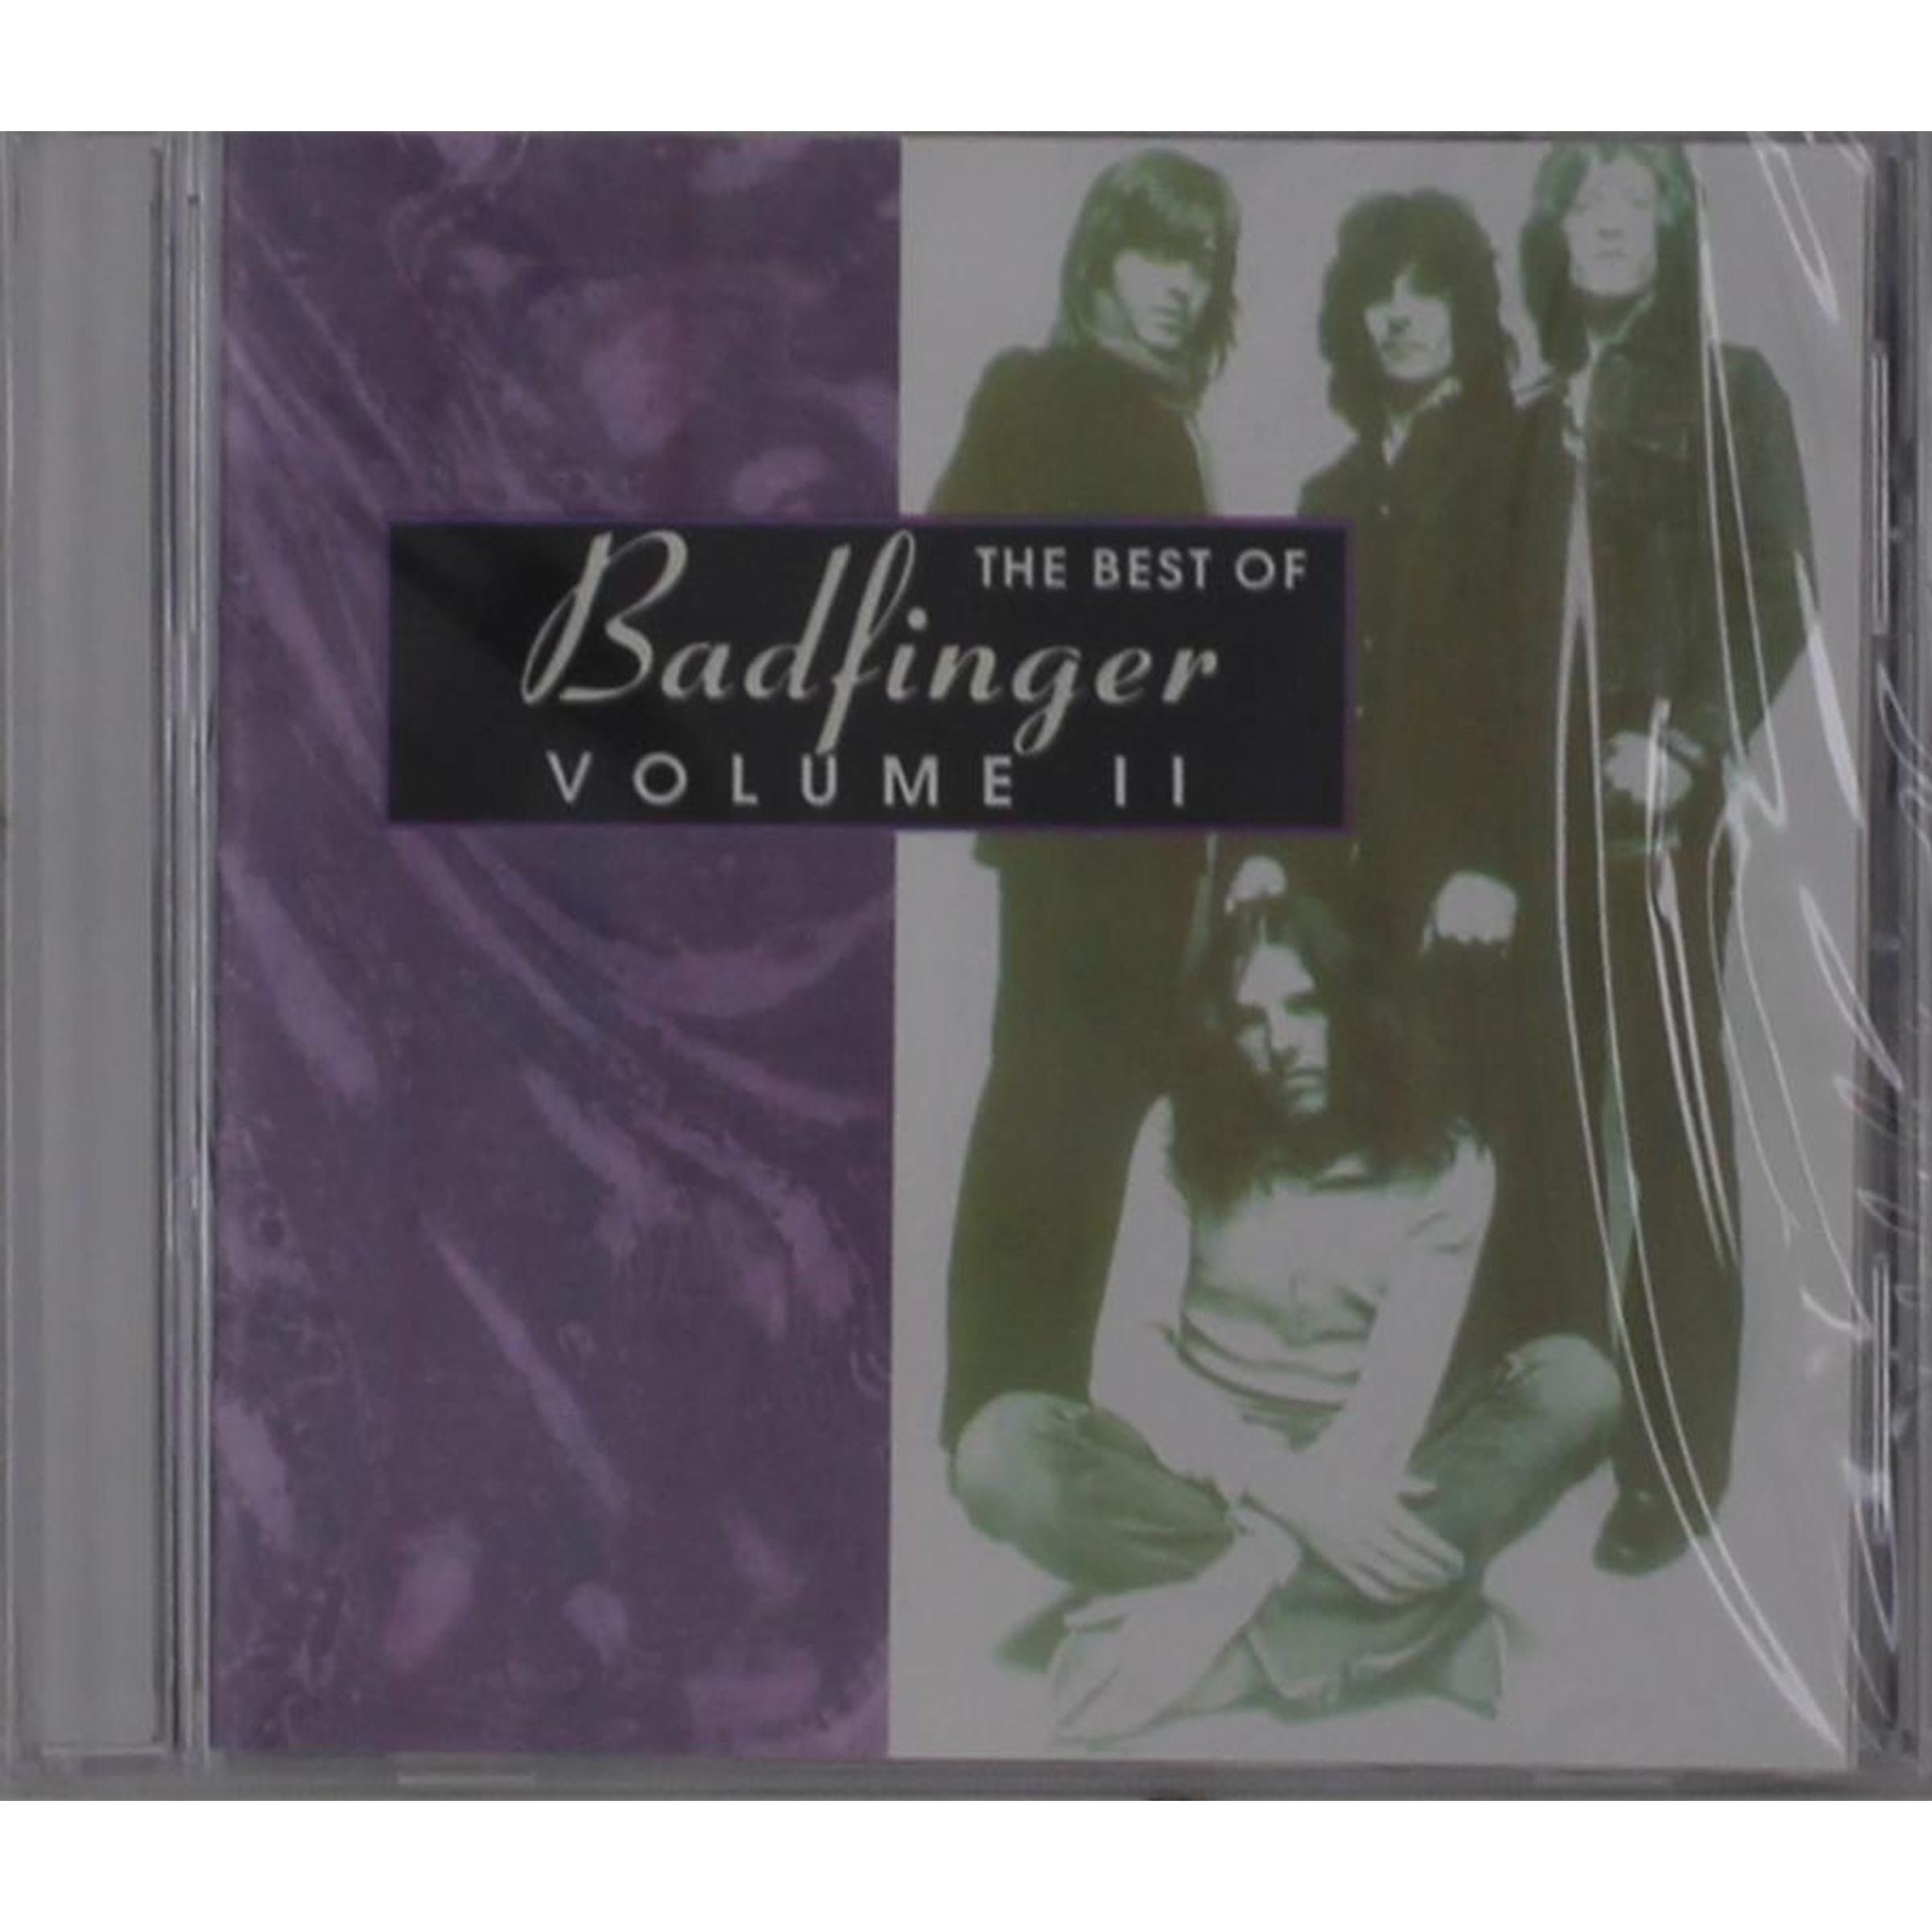 THE BEST OF BADFINGER VOL.2